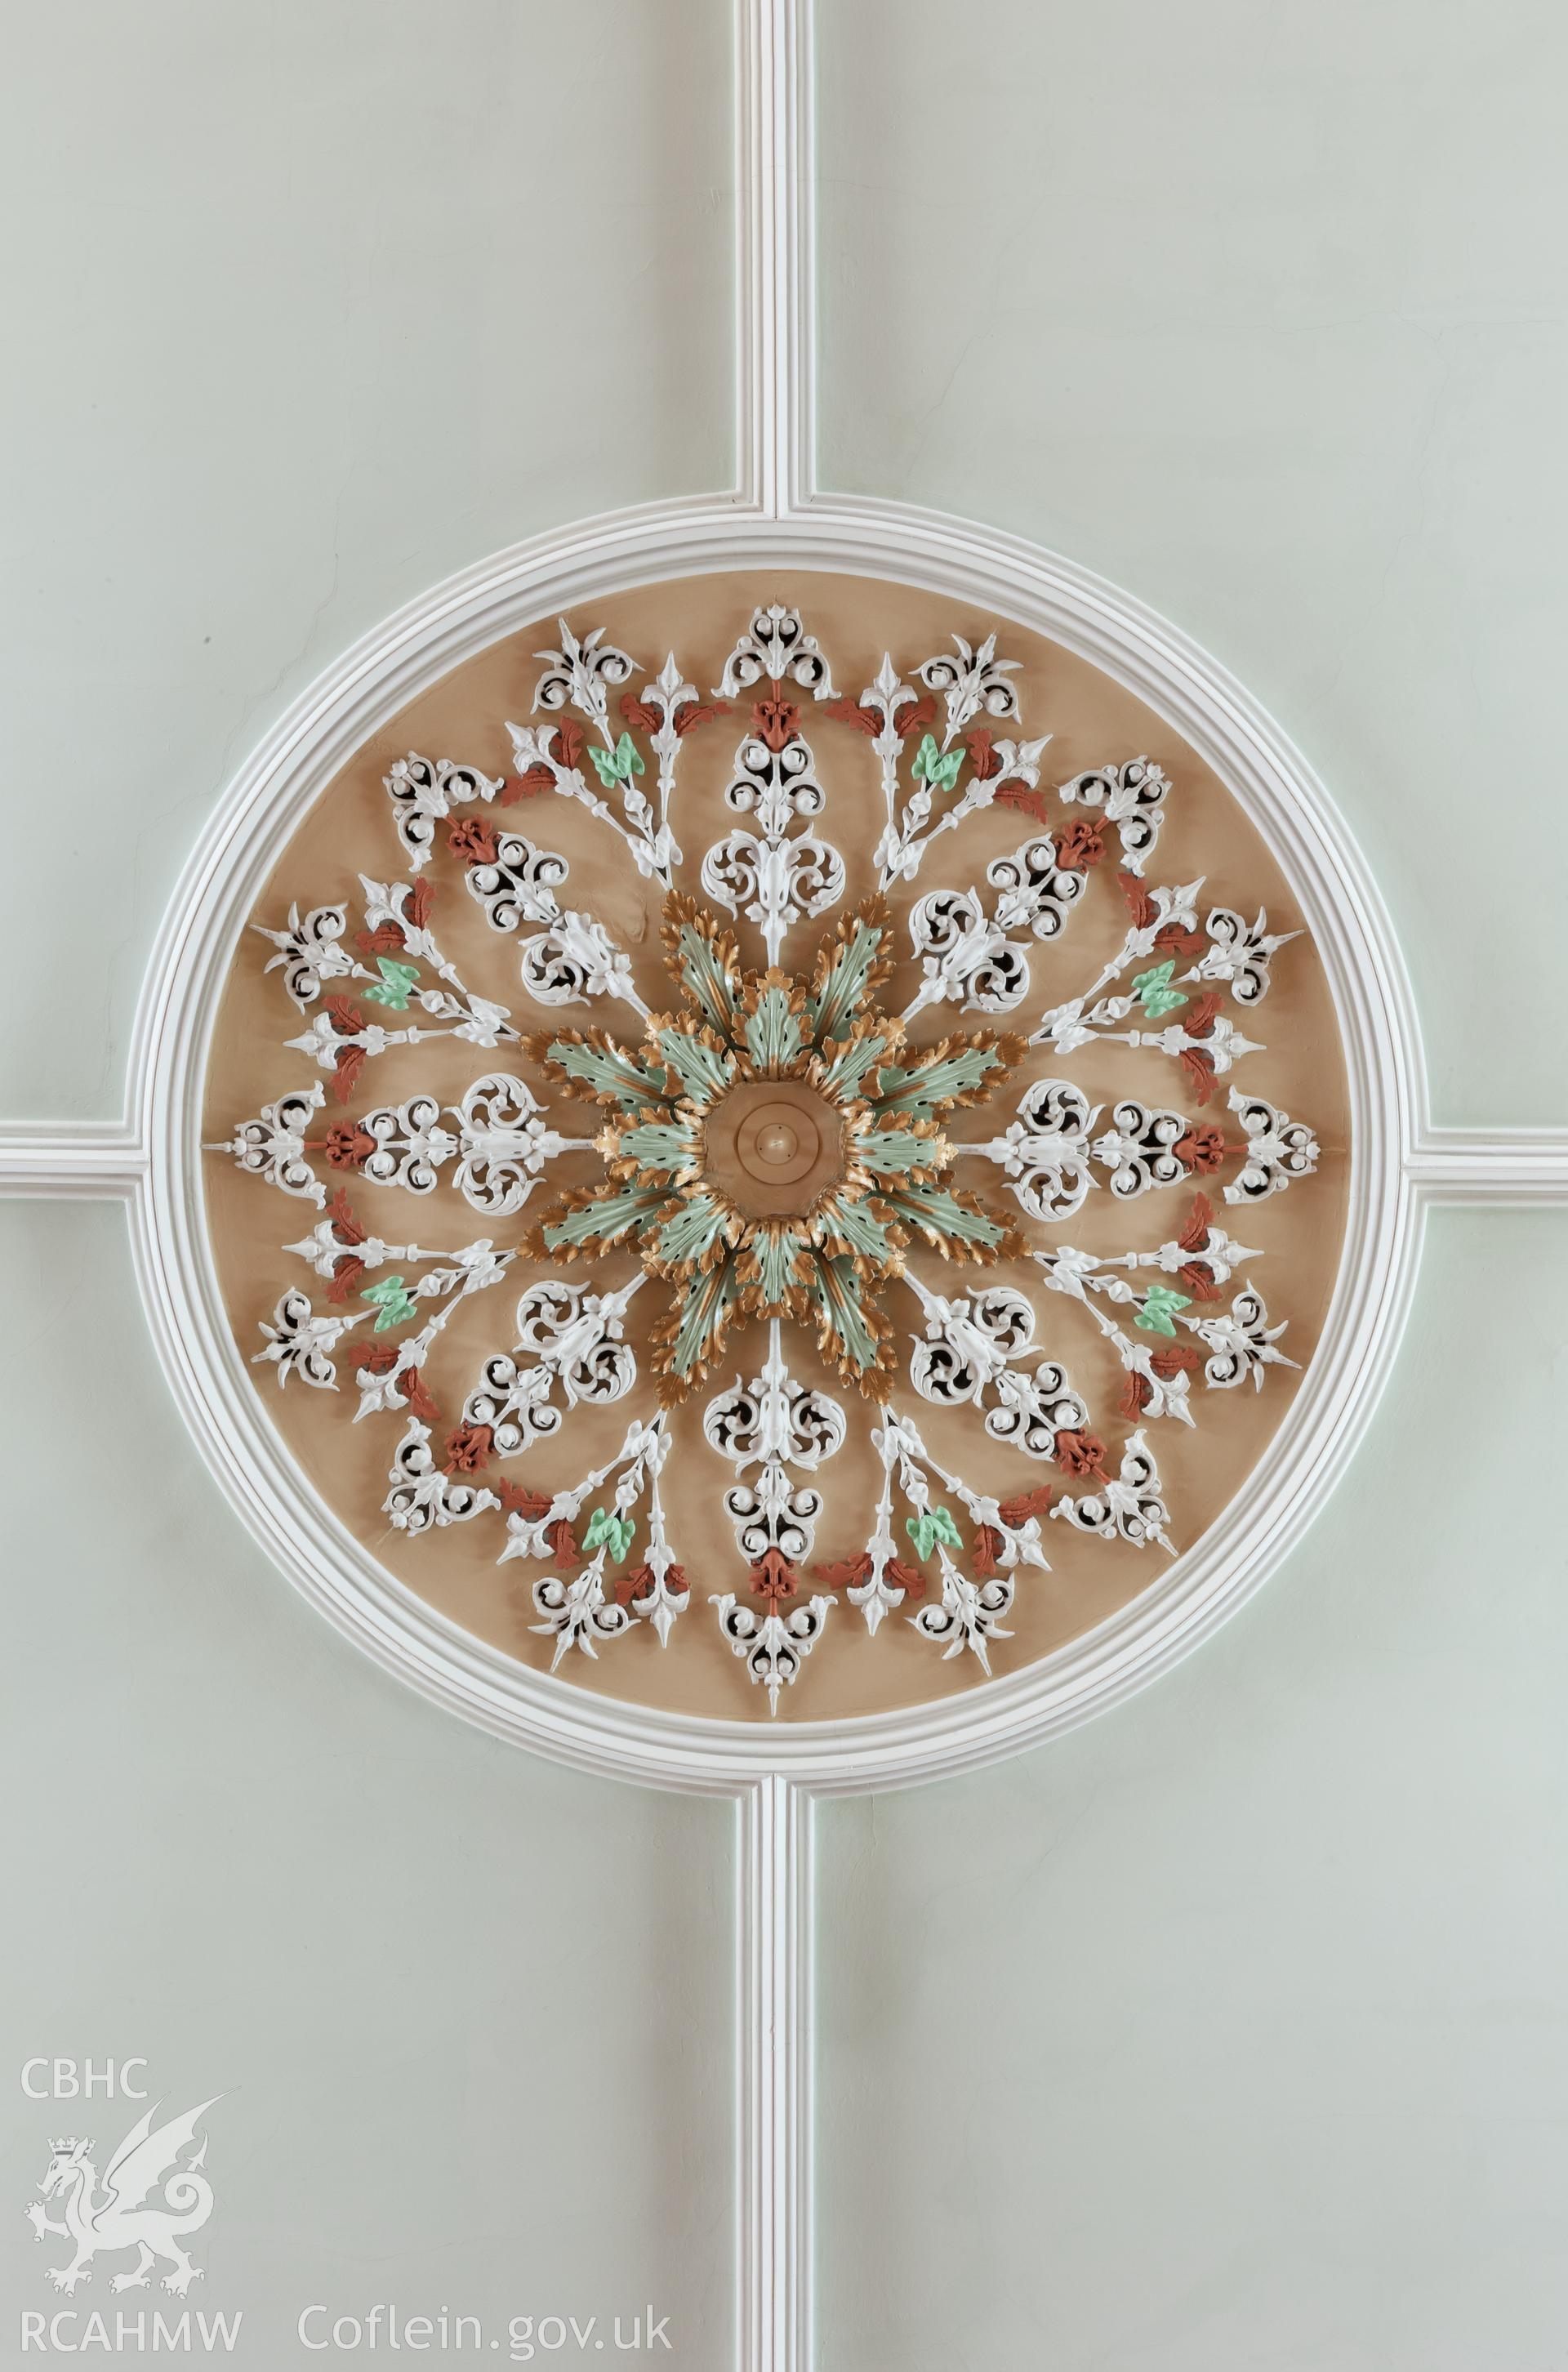 Detail of ceiling rose